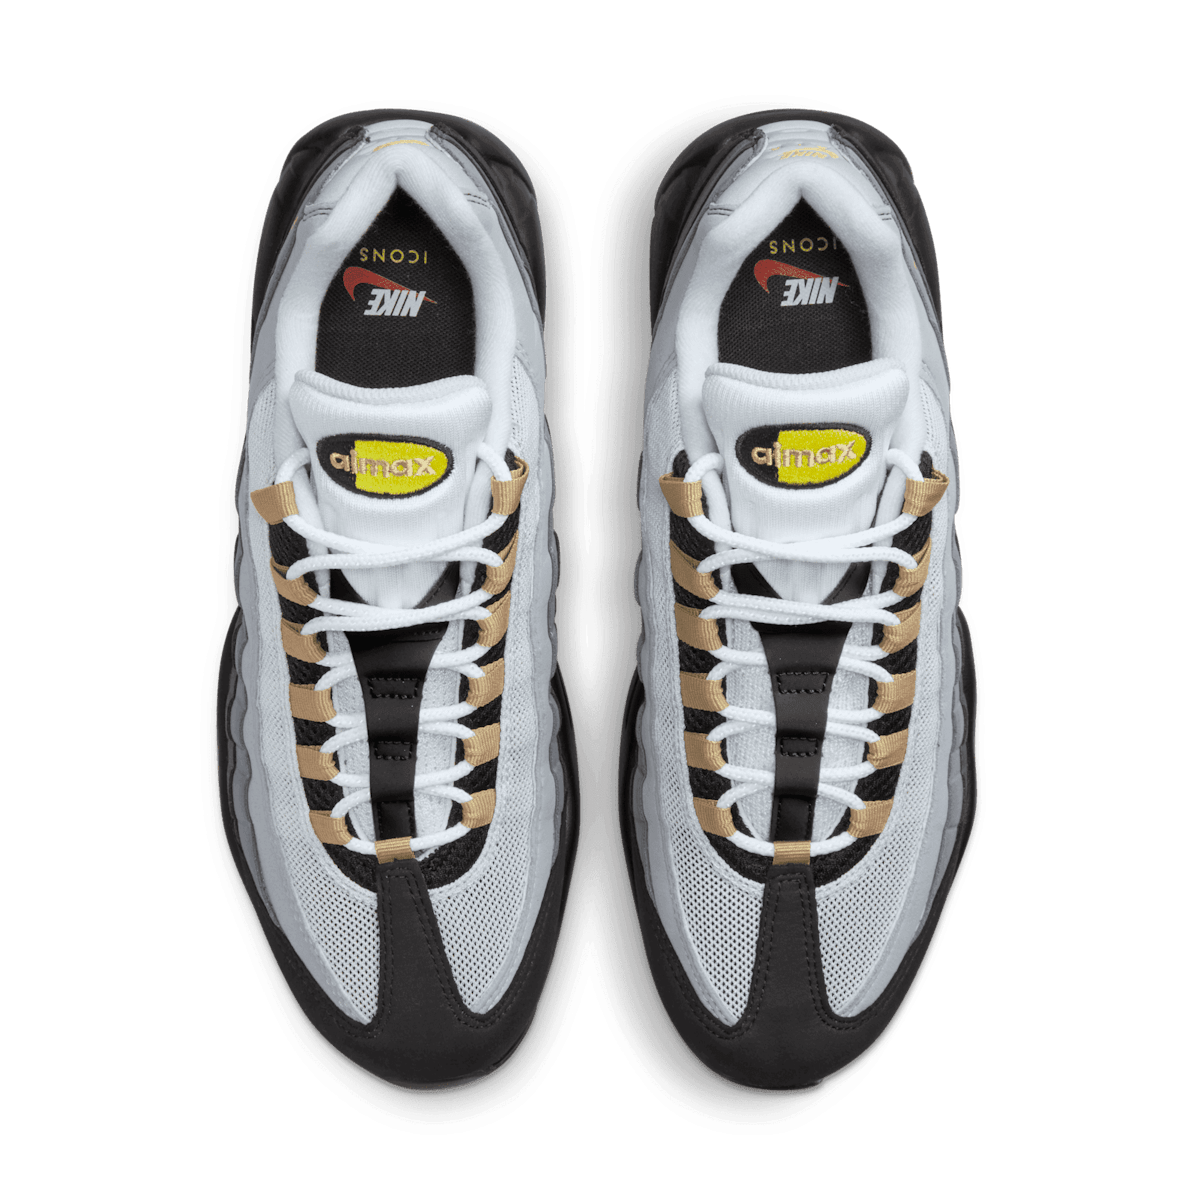 Nike Air Max 95 Icons - DX4236-100 Raffles and Release Date